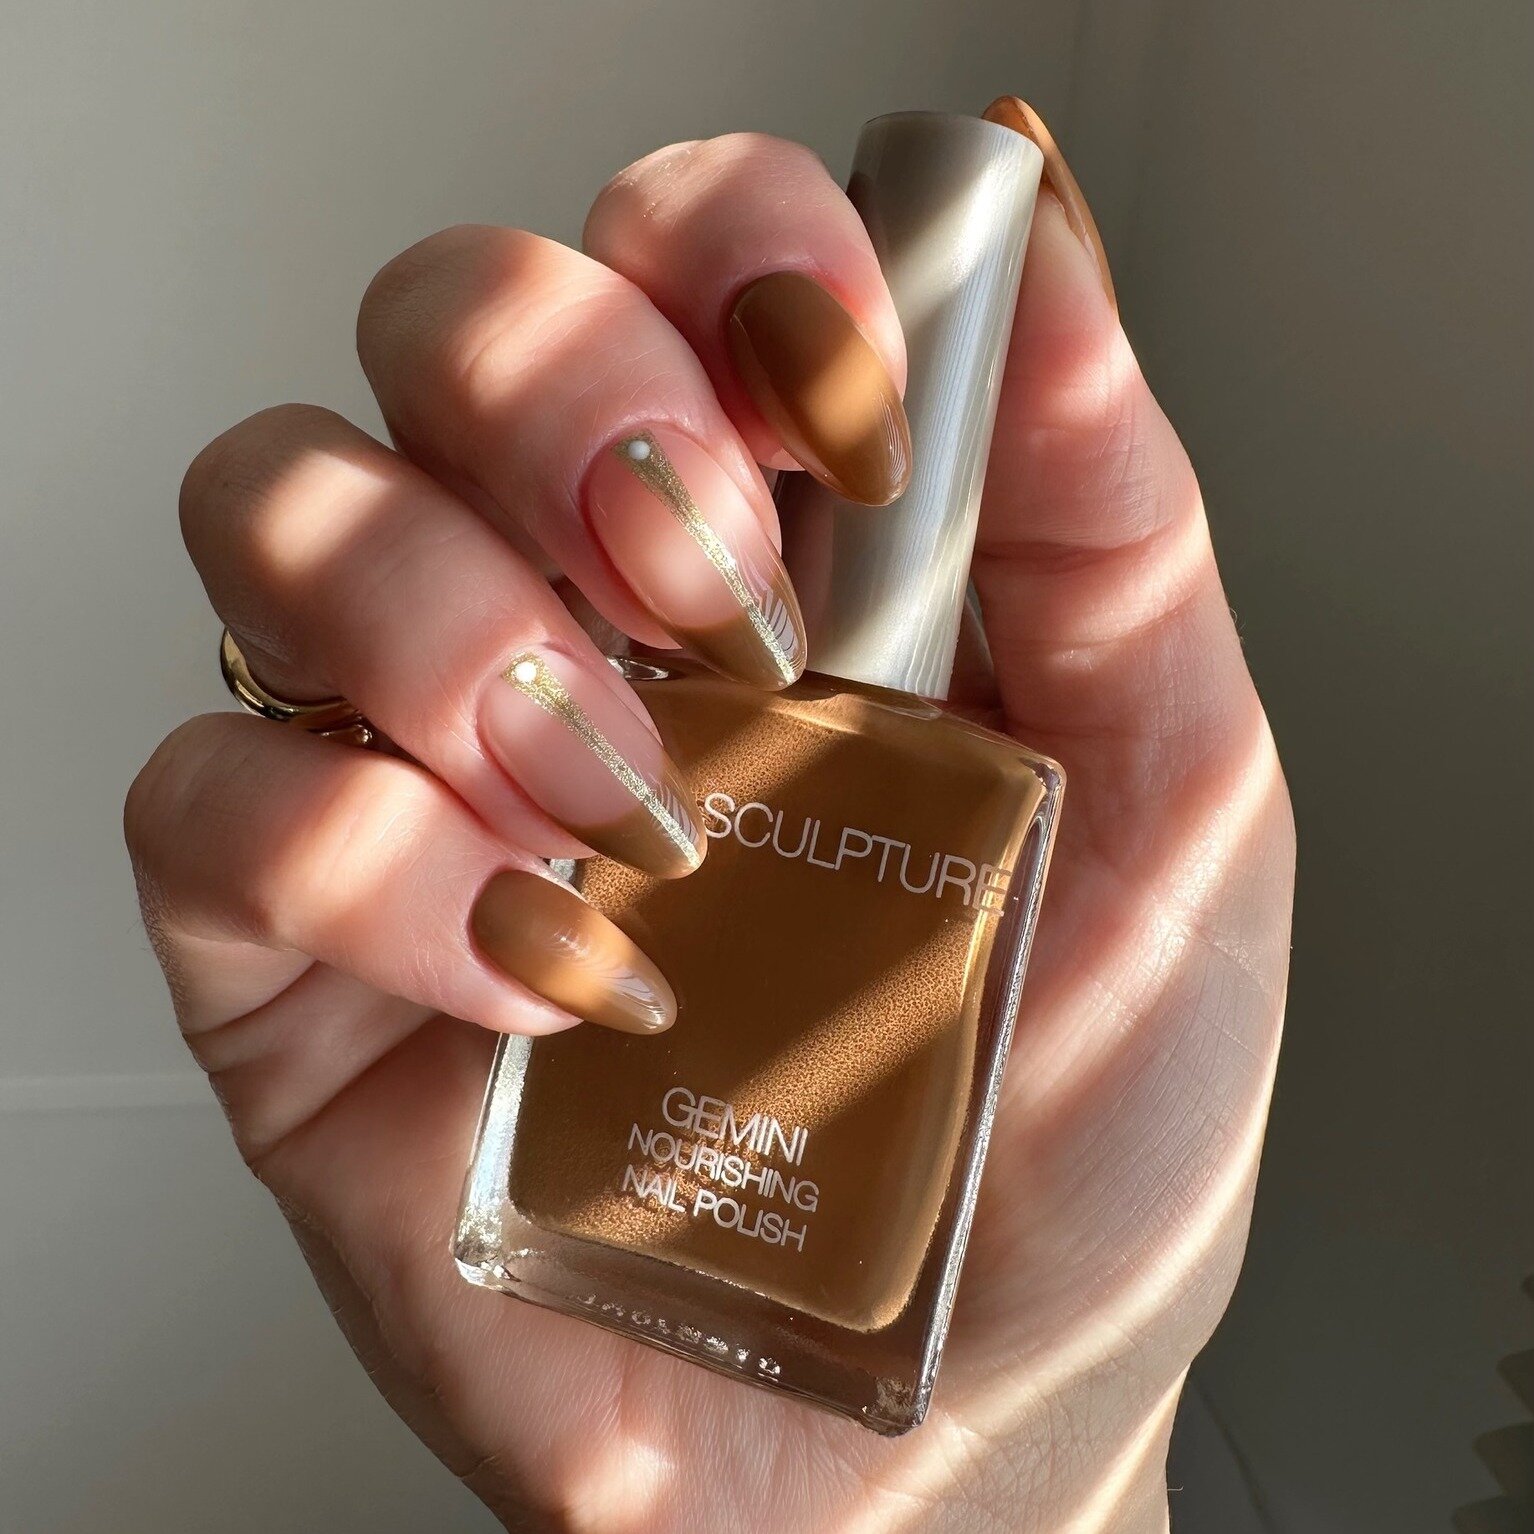 Coffee Browns for those cold Winter mornings !

💅 @monart_nailstudio 
🎨 BIOGEL #307 Dust at Dusk 

Bio Sculpture 
Healthy l Ethical l Professional